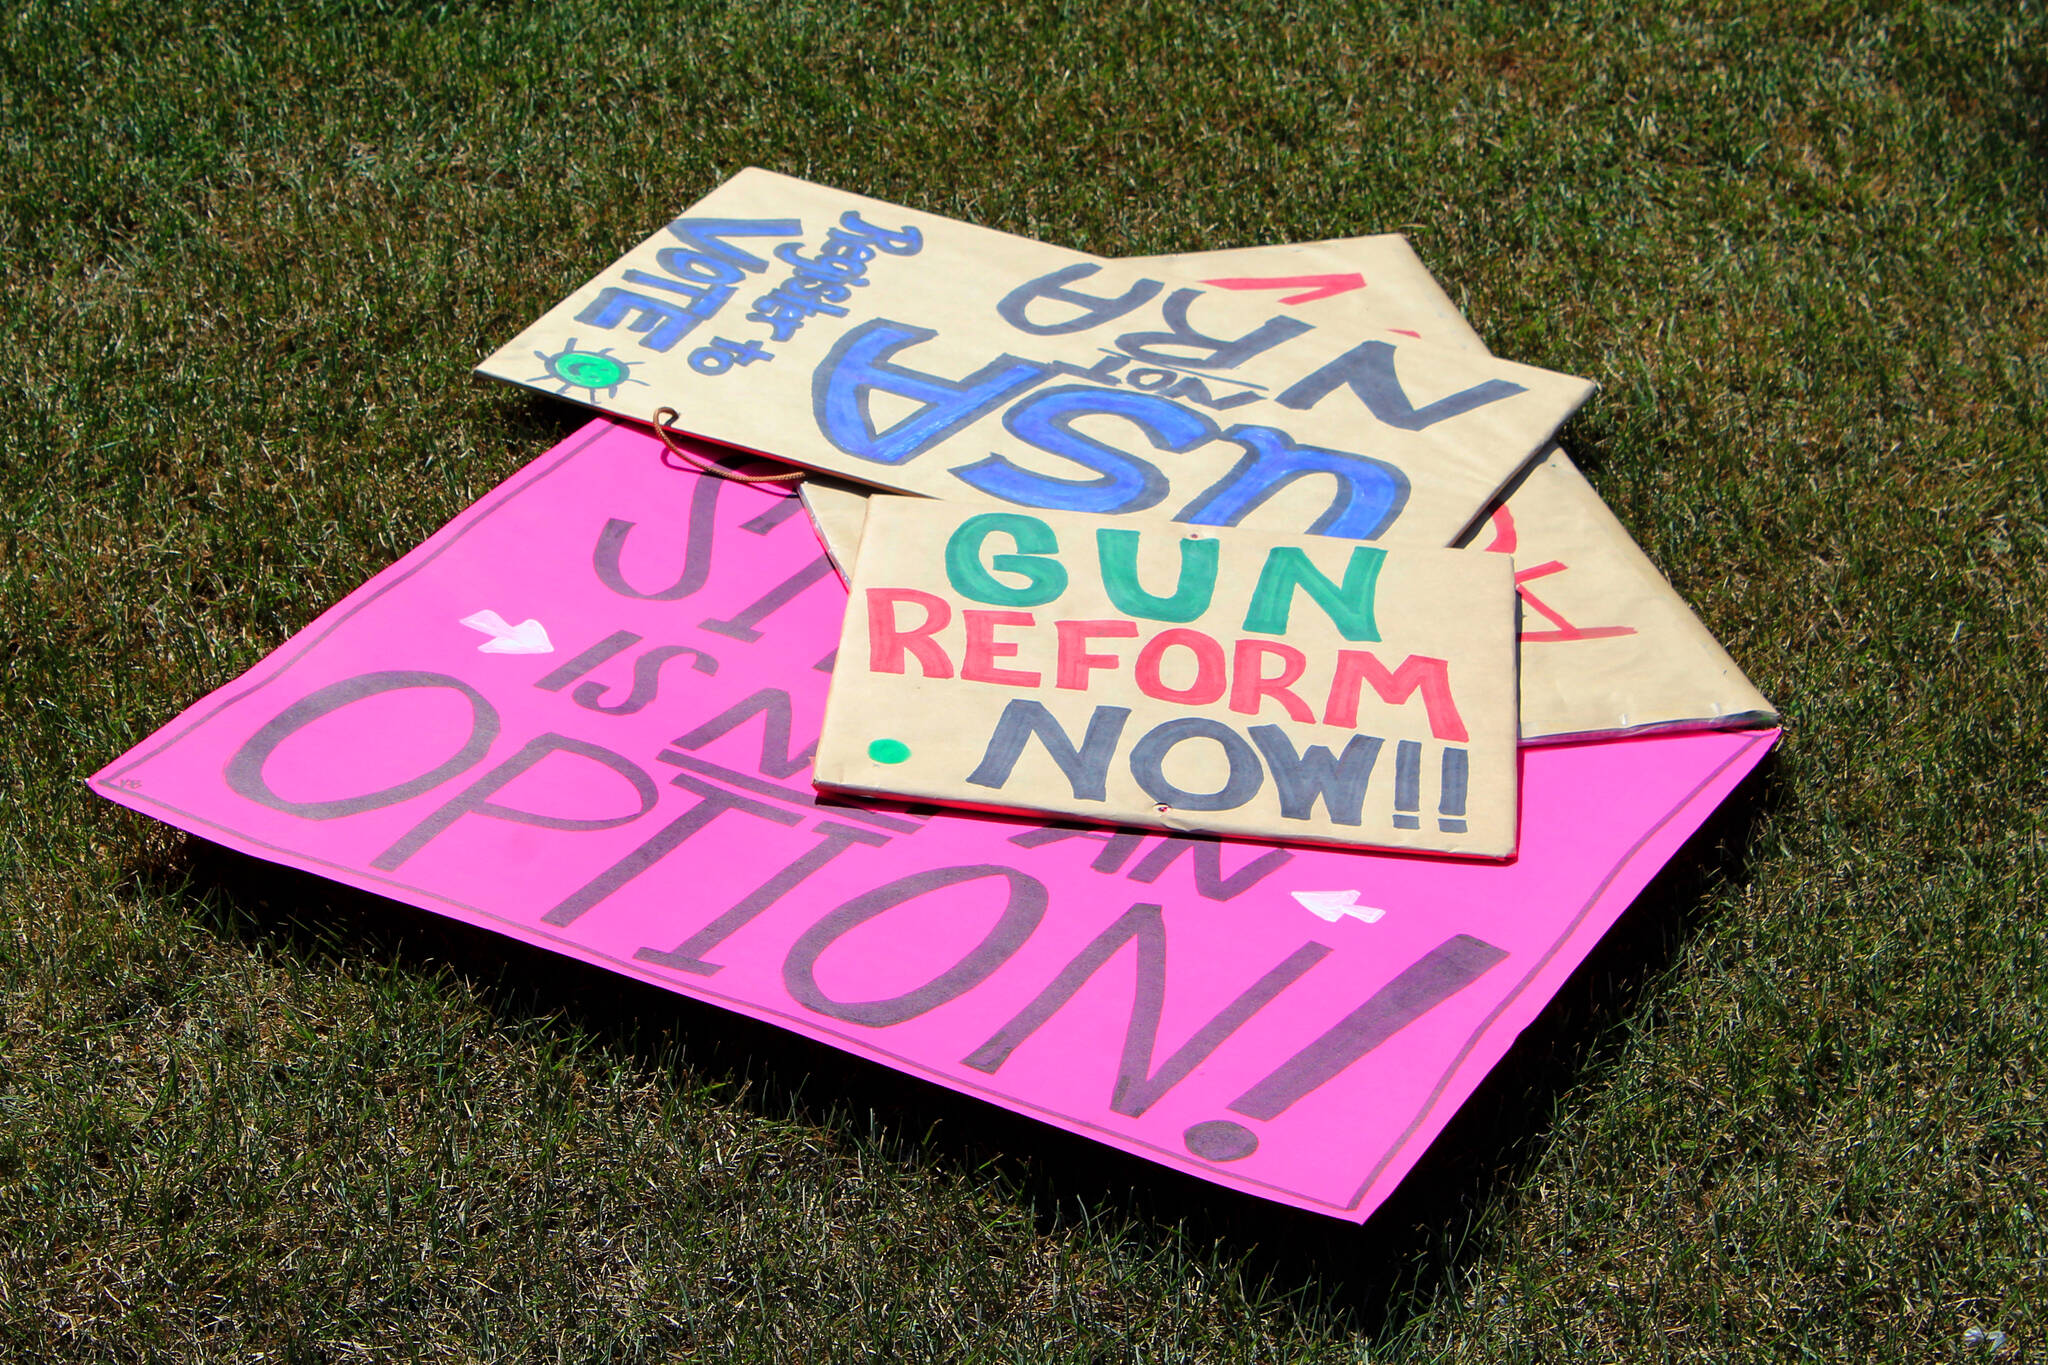 Signs are stacked on the ground during a demonstration opposing gun violence on Saturday, June 11, 2022, in Soldotna, Alaska. The local protest was part of a nationwide call to action issued by the nonprofit organization March for Our Lives, which was formed after a 2018 school shooting in Parkland, Florida, and aims to end gun violence. (Ashlyn O’Hara/Peninsula Clarion)